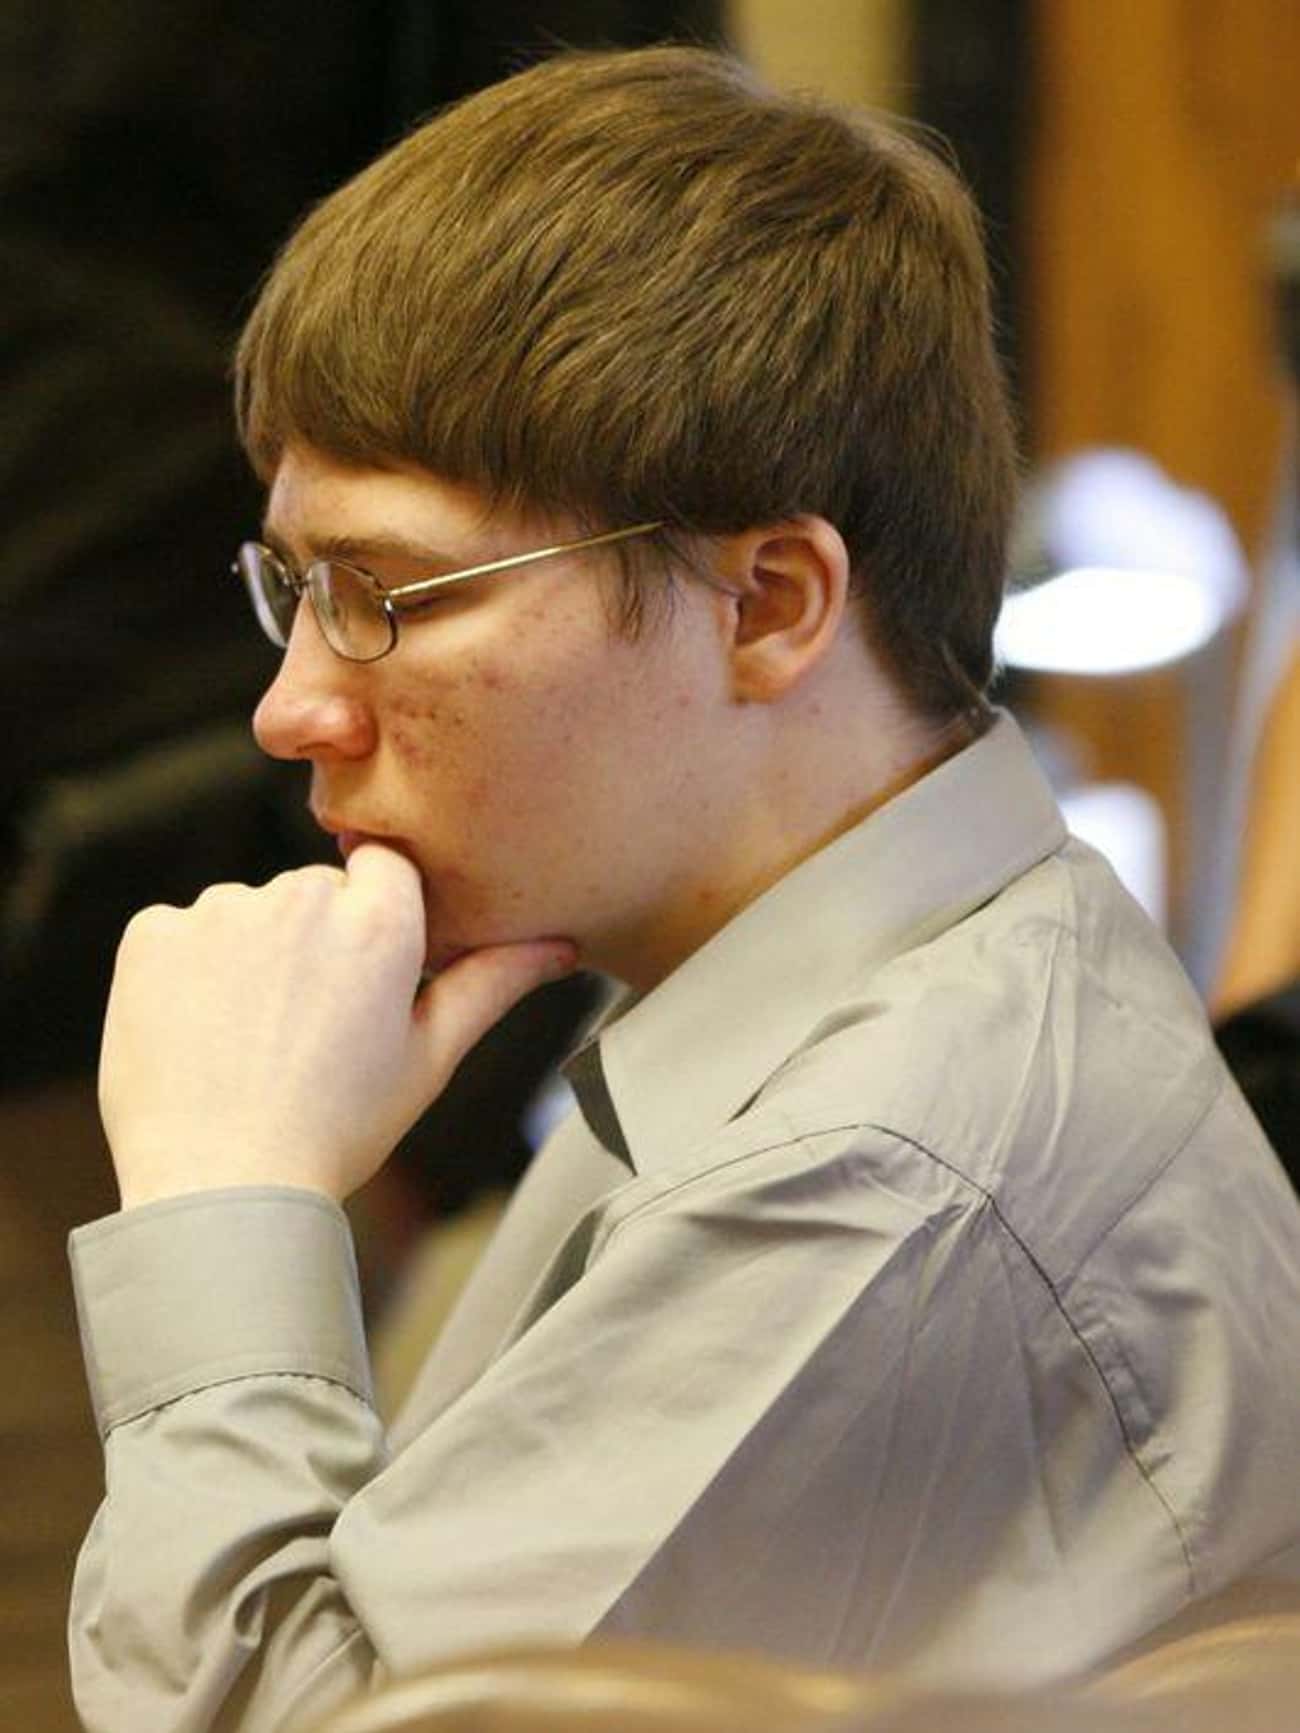 Dassey Had A Low I.Q. And Was Enrolled In Special Education Classes